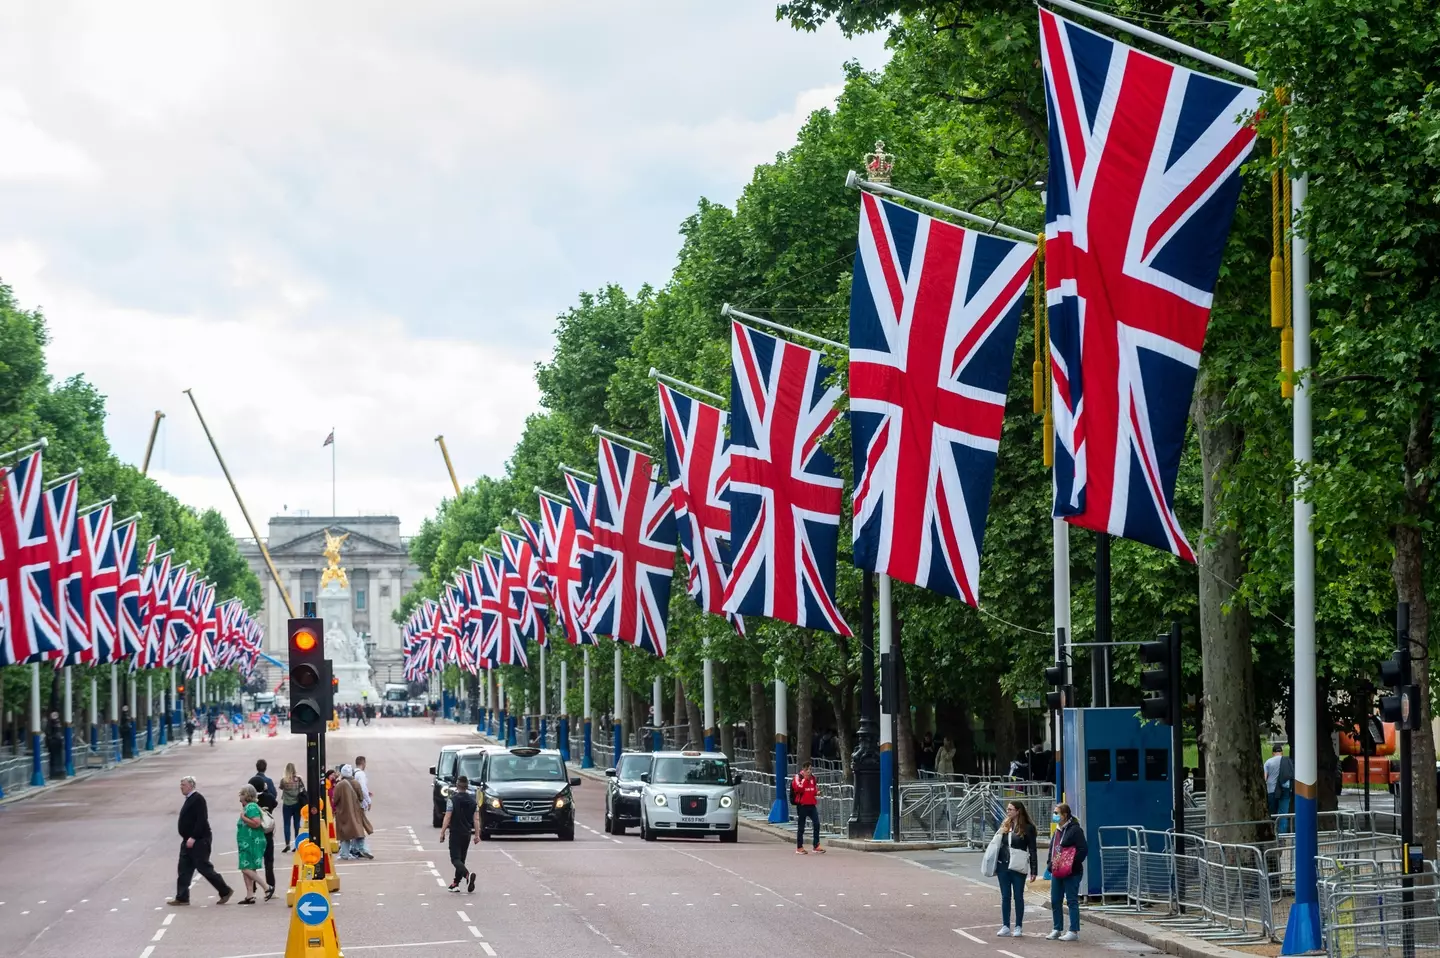 The Mall has been adorned with flags in celebration of the Jubilee.